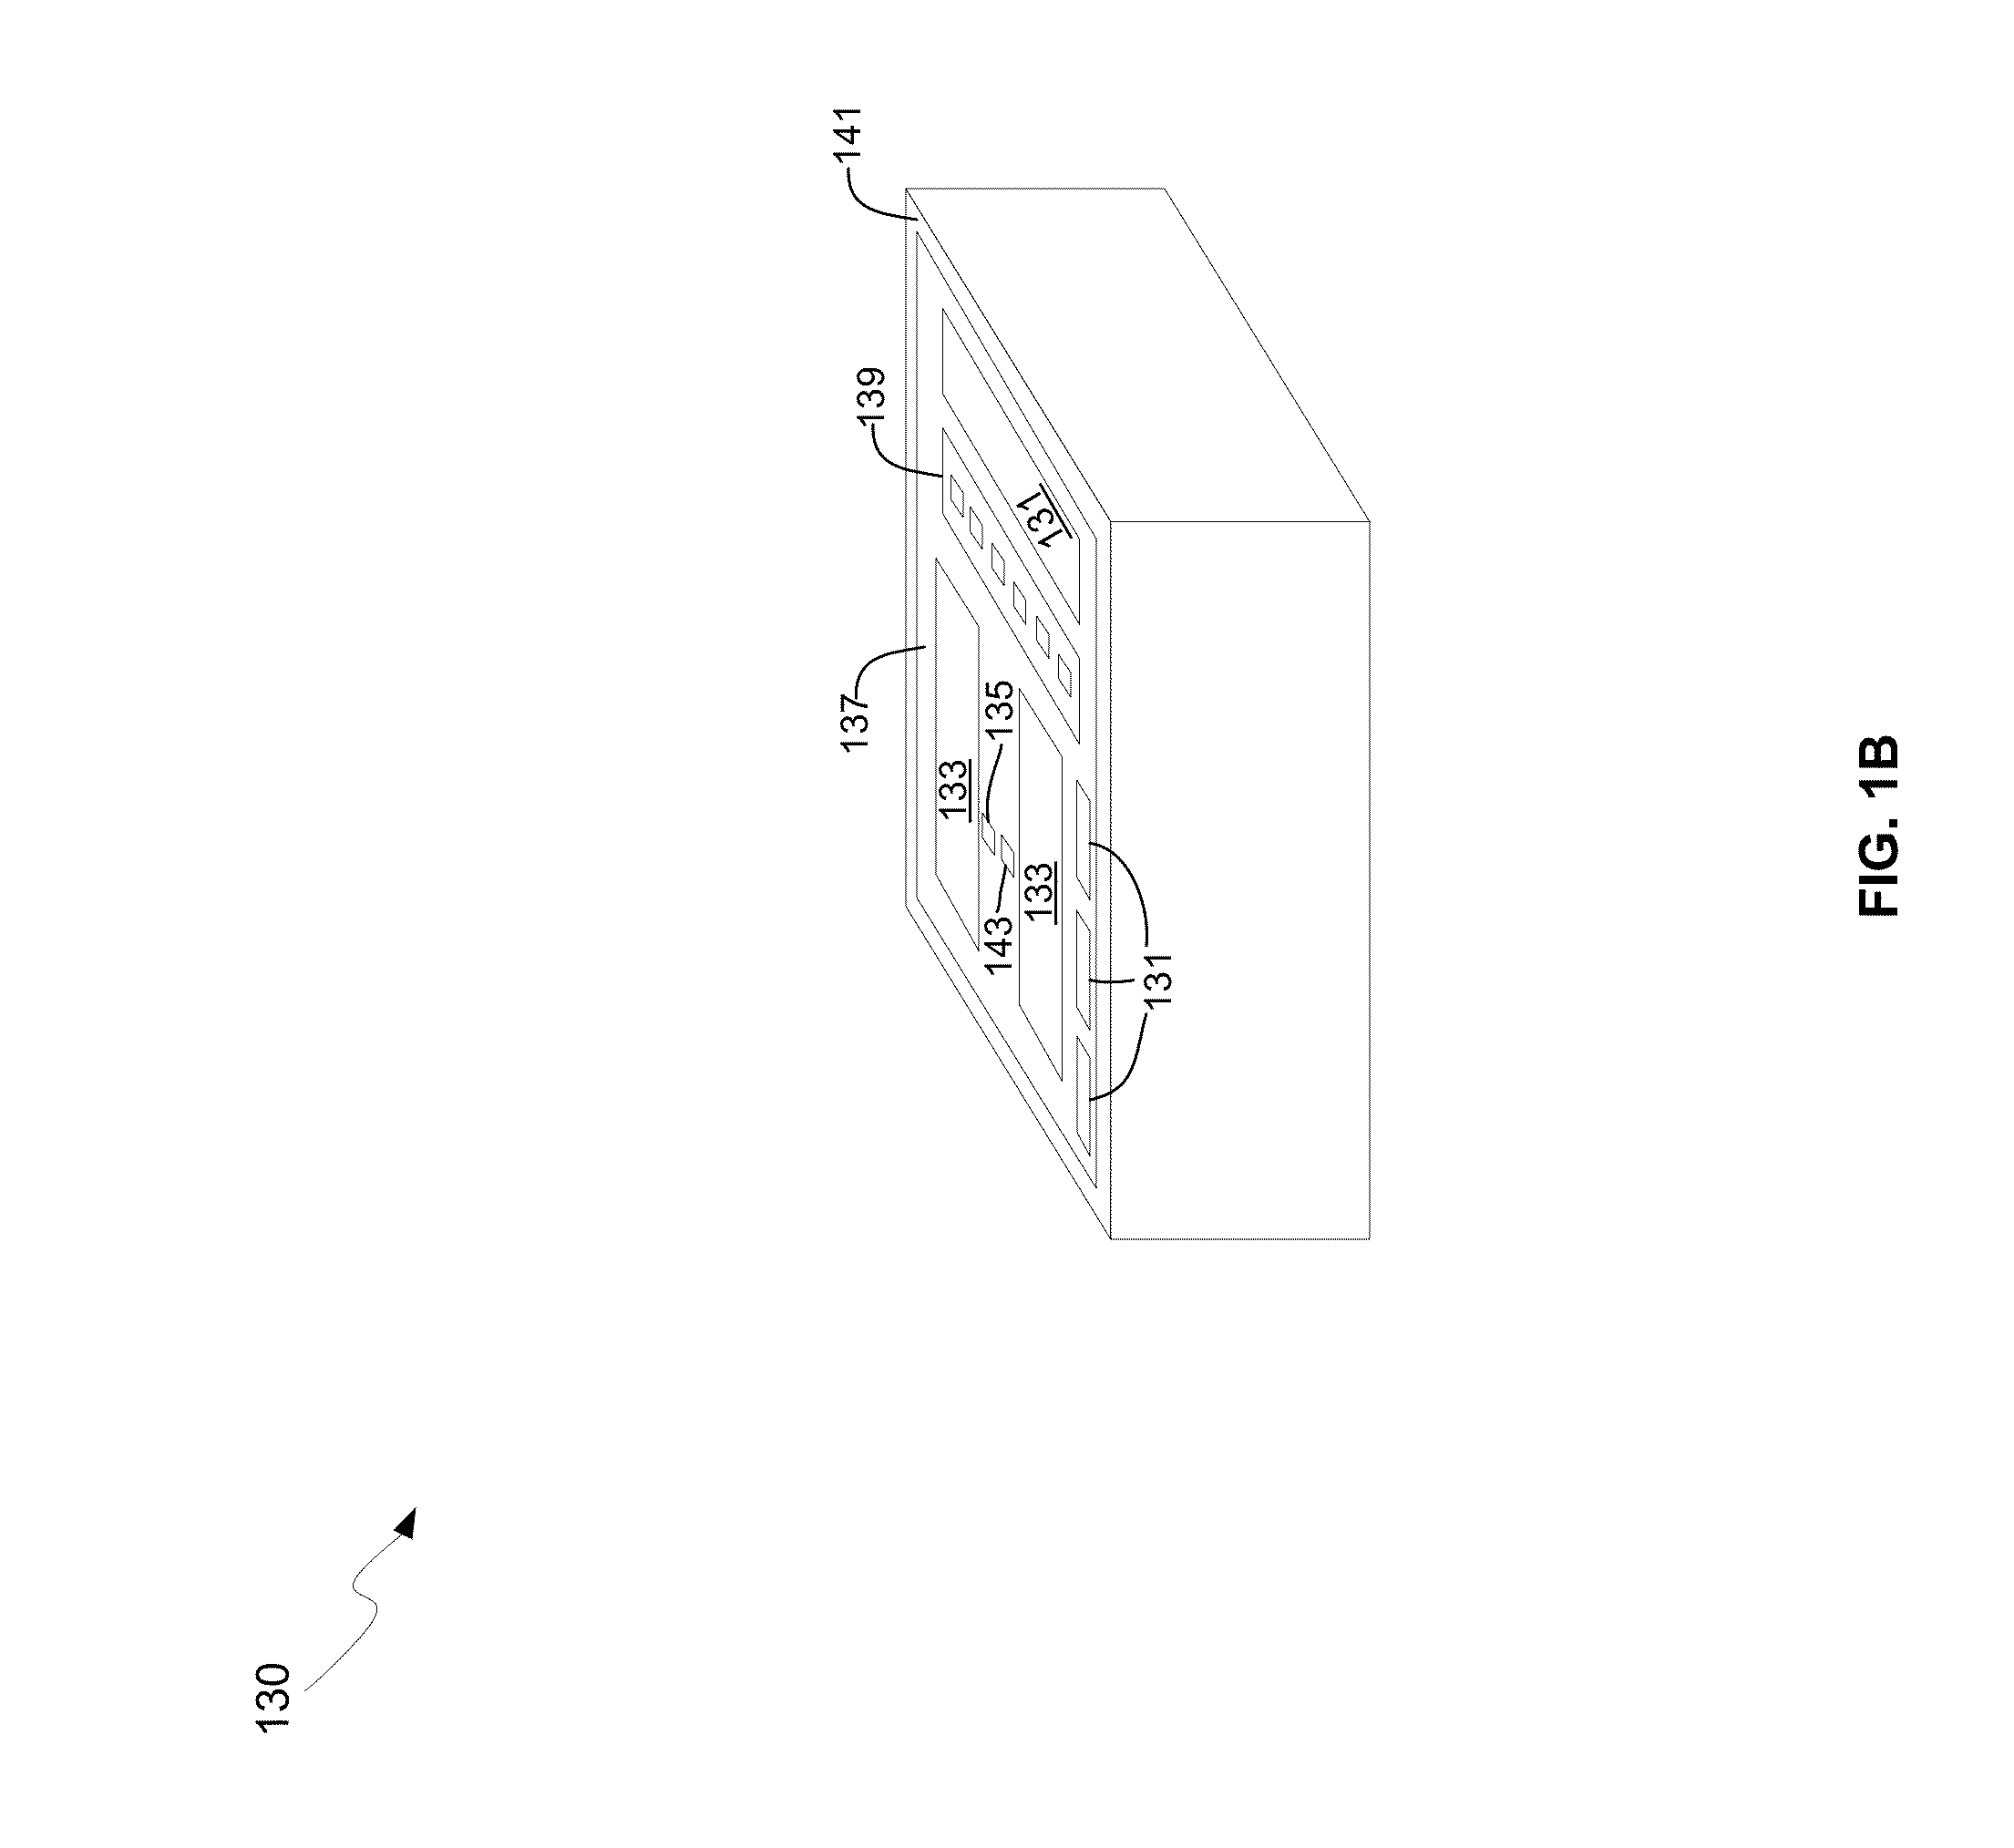 Method And System For Silicon Photonics Wavelength Division Multiplexing Transceivers